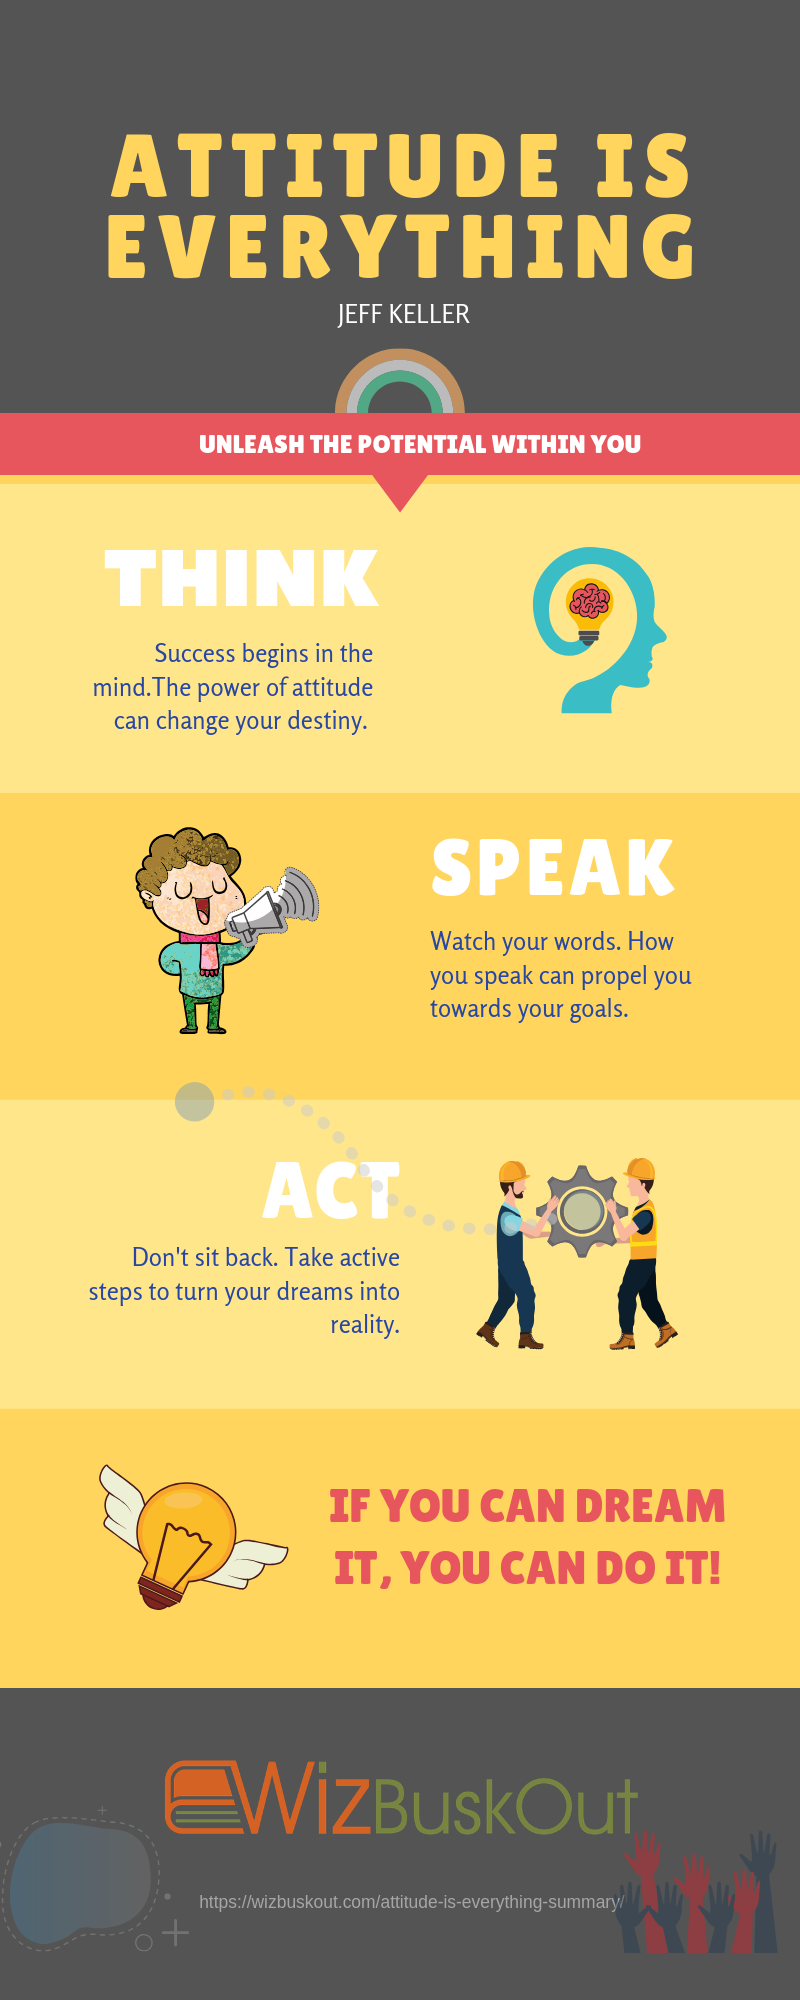 Attitude is everything infographic